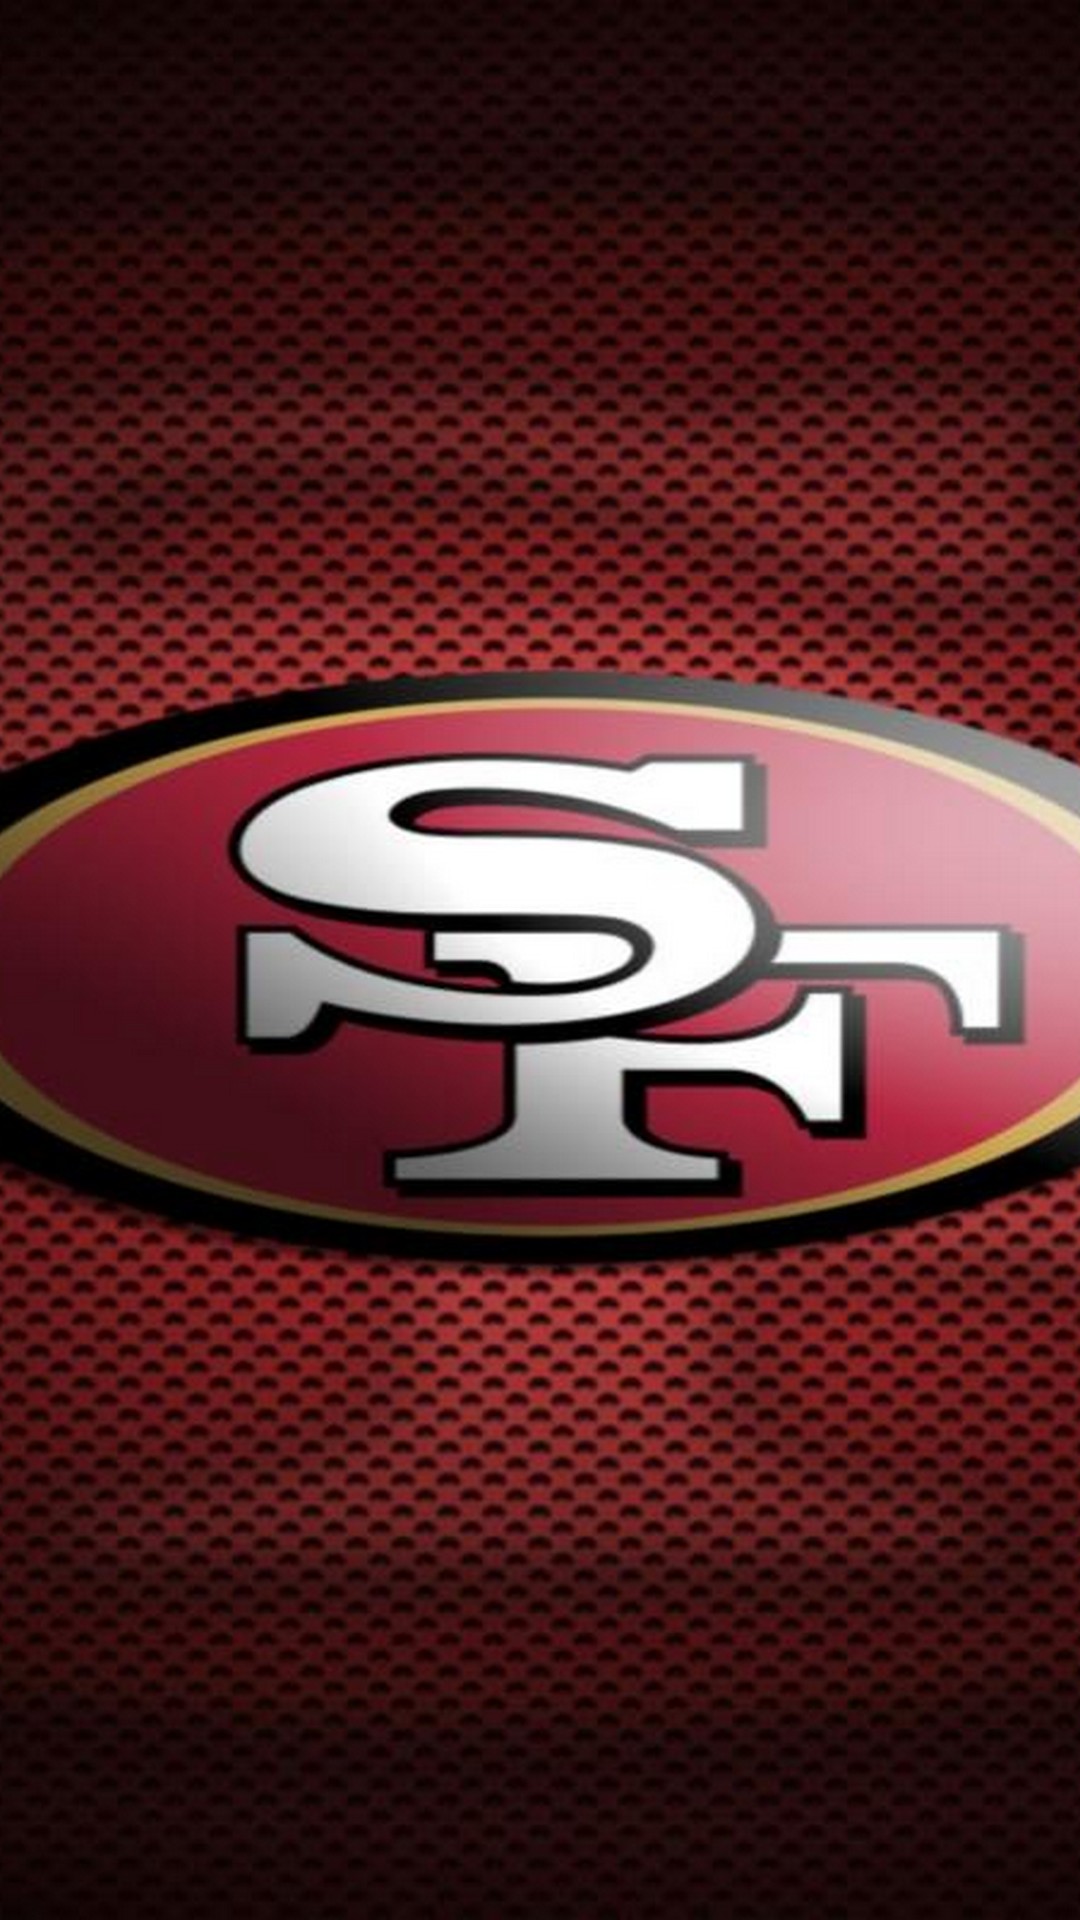 San Francisco 49ers iPhone 7 Wallpaper With high-resolution 1080X1920 pixel. You can use this wallpaper for your Mac or Windows Desktop Background, iPhone, Android or Tablet and another Smartphone device